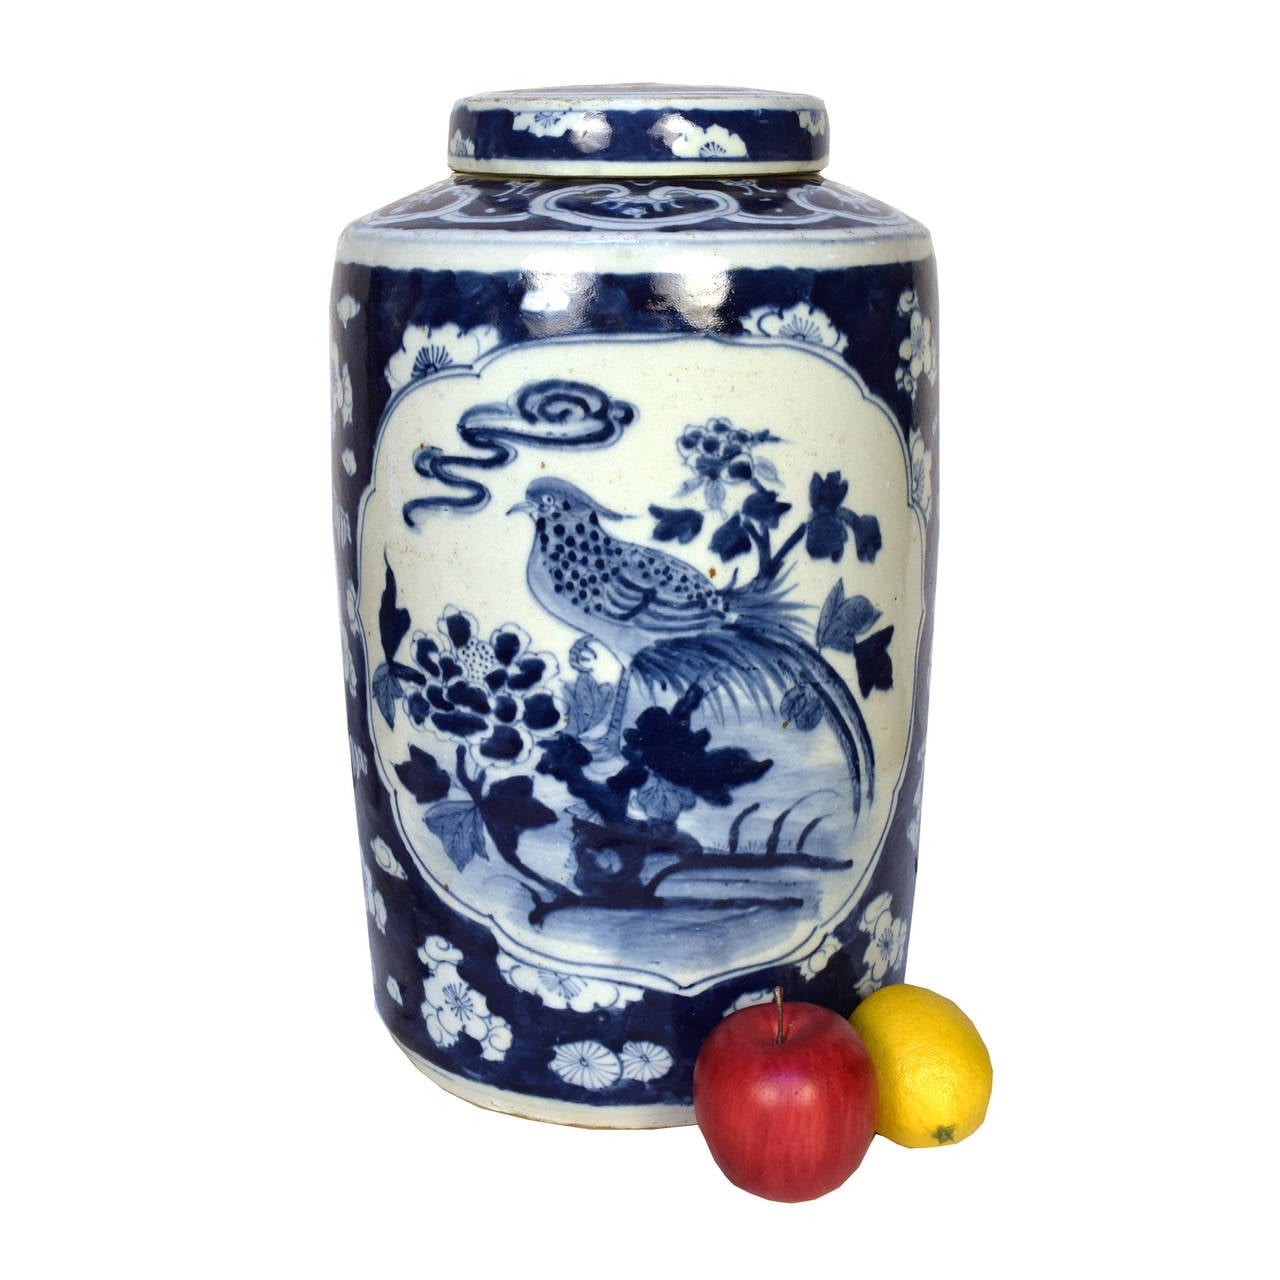 Blue and White porcelain jar with lid depicting birds, peonies & chrysanthemums, Chinese symbols of harmony, compassion, and good fortune.